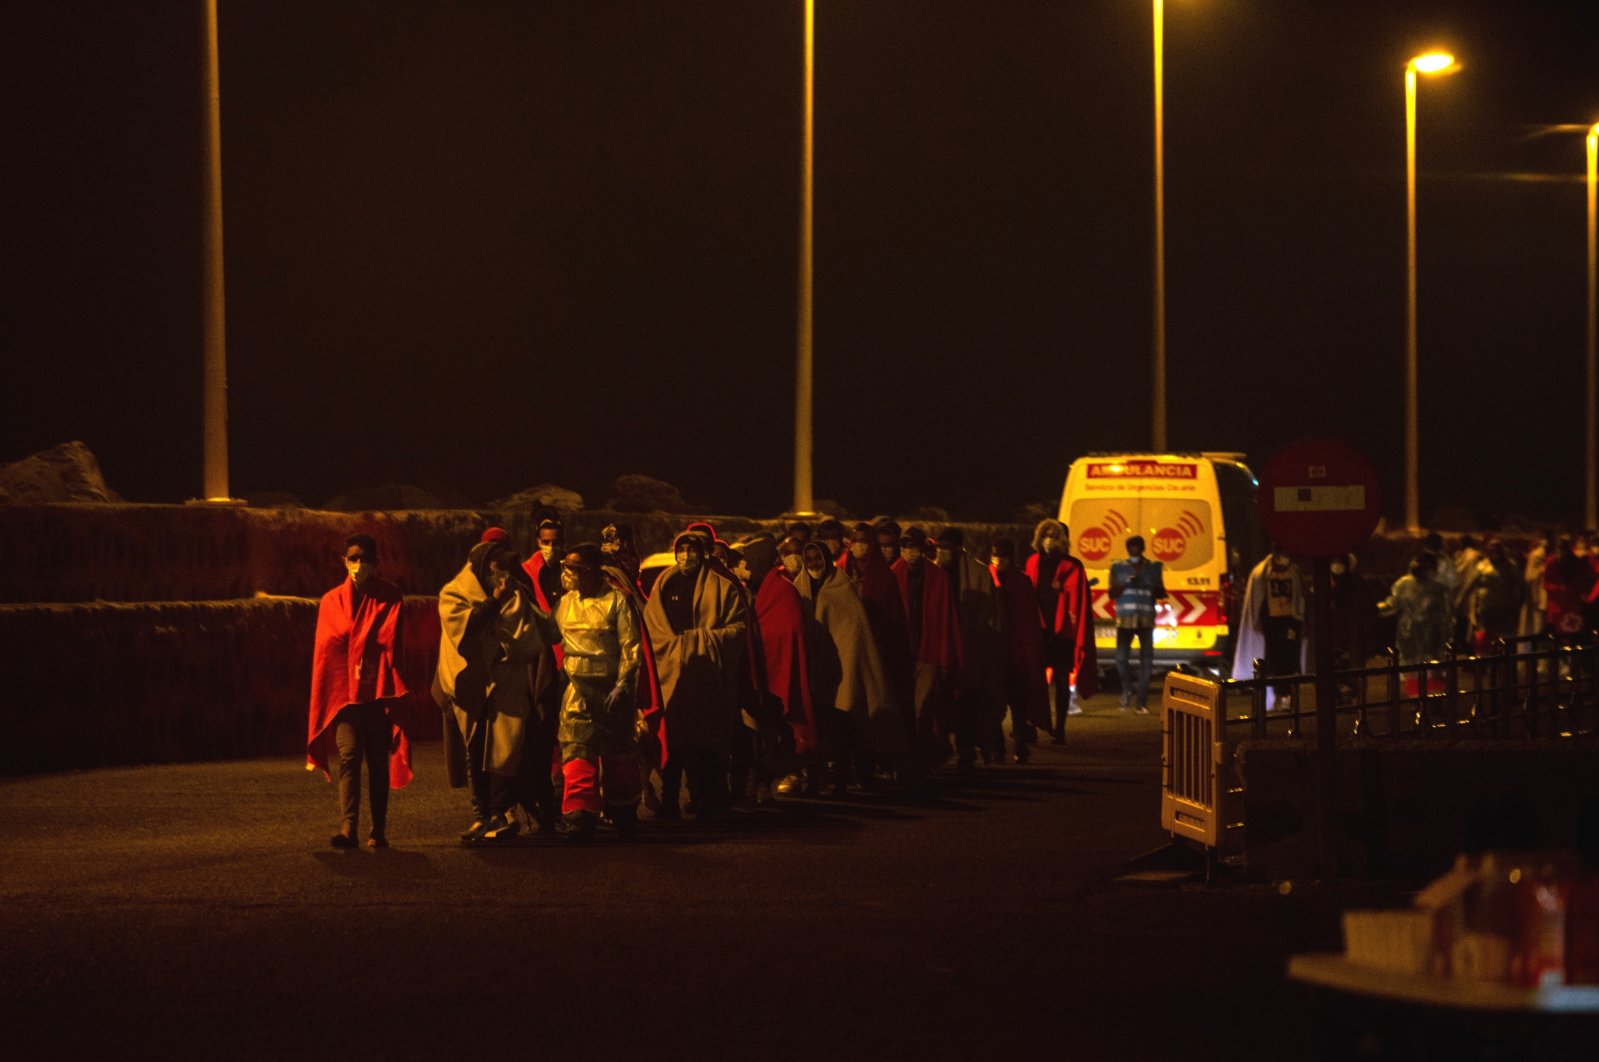 About 81 migrants, who traveled in two boats and who were rescued by Spanish Sea Rescue, arrive at Arrecifes port, in Lanzarote, Canary Islands, Nov. 22, 2021. (EPA/JAVIER FUENTES)